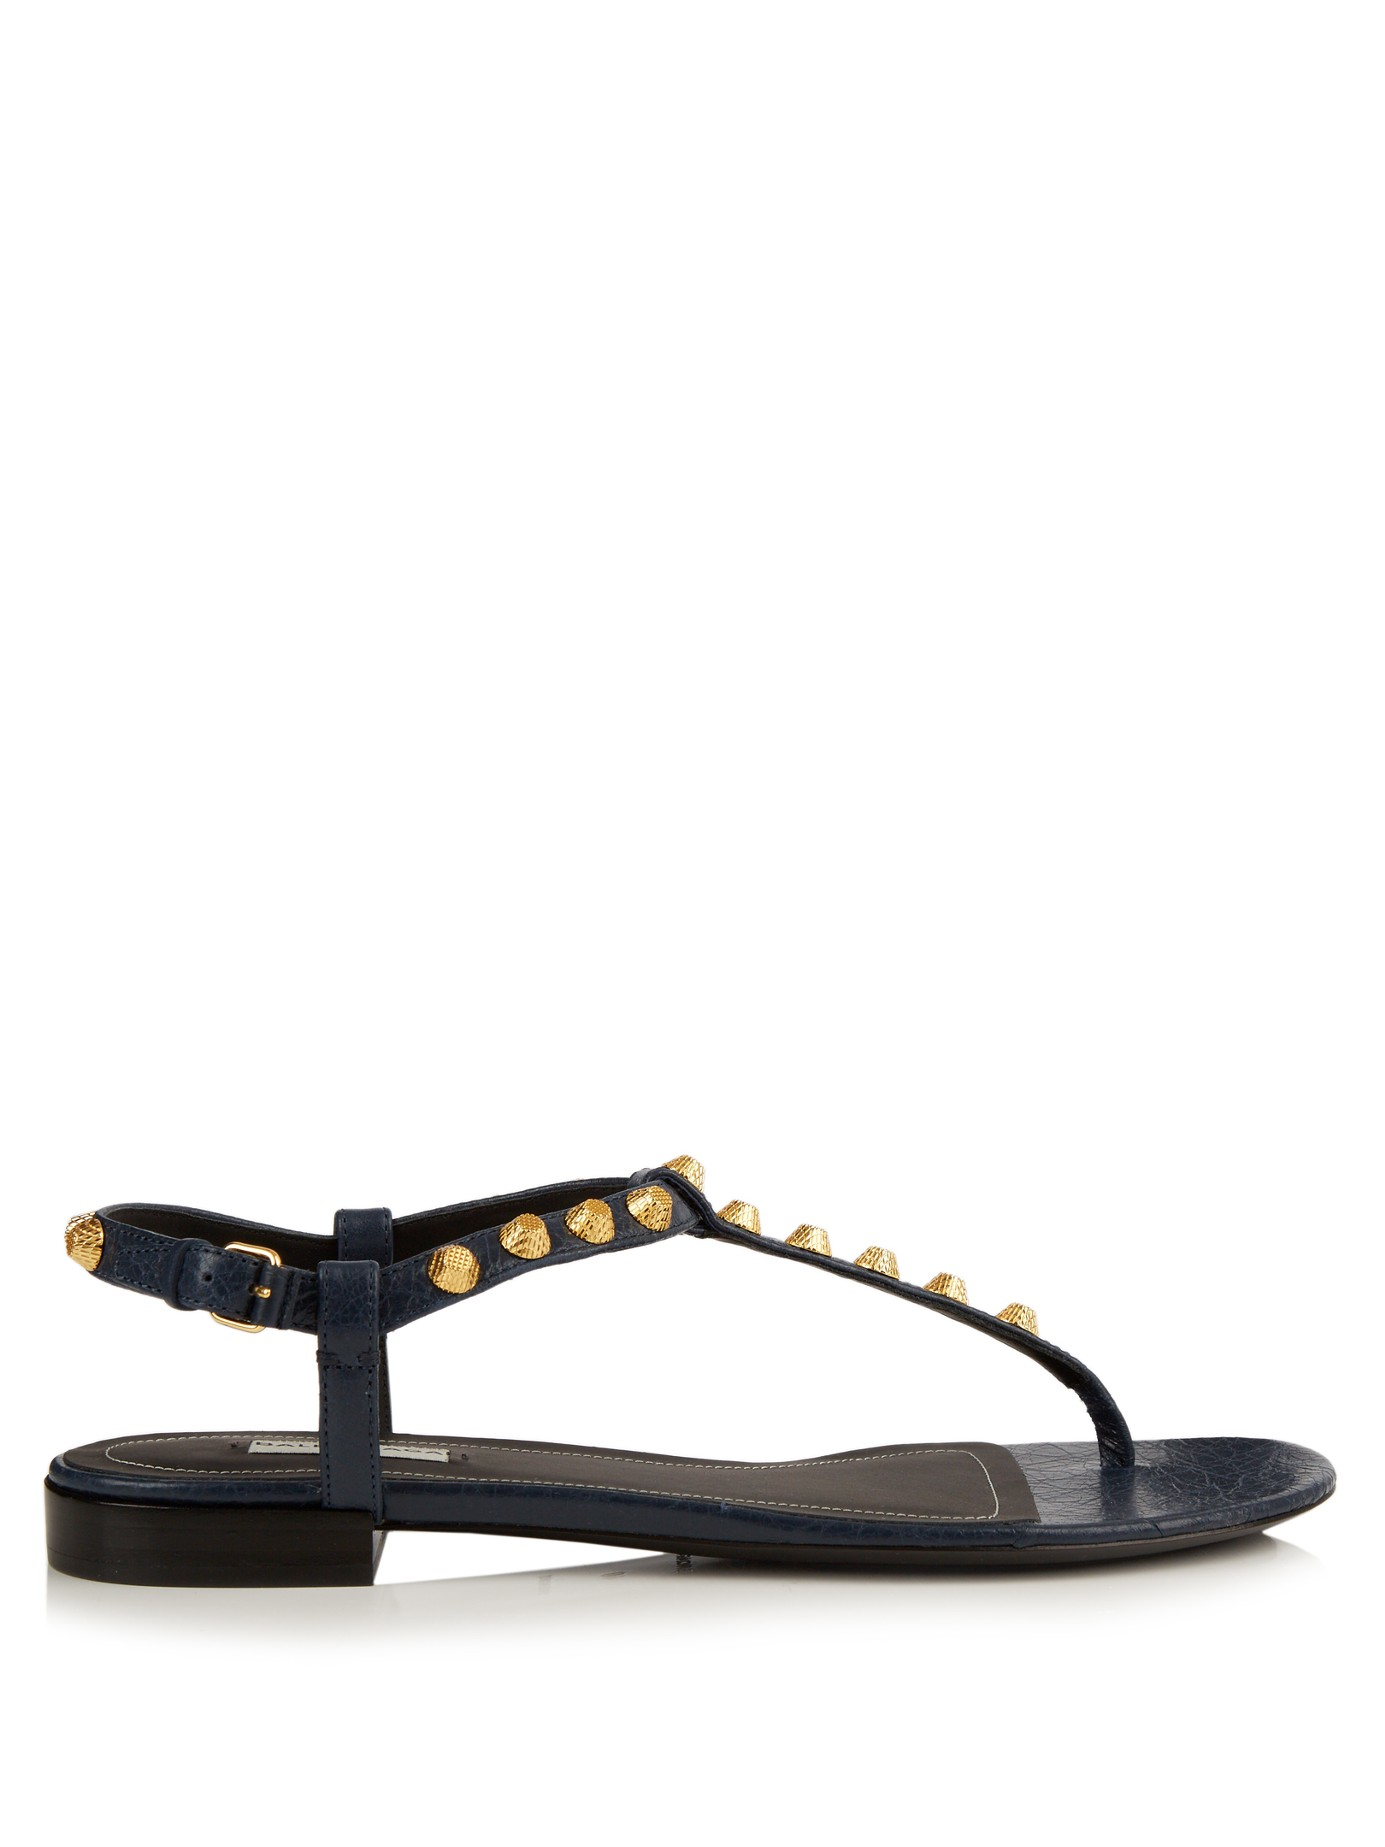 Balenciaga Arena Studded Leather Sandals in Navy (Blue) | Lyst